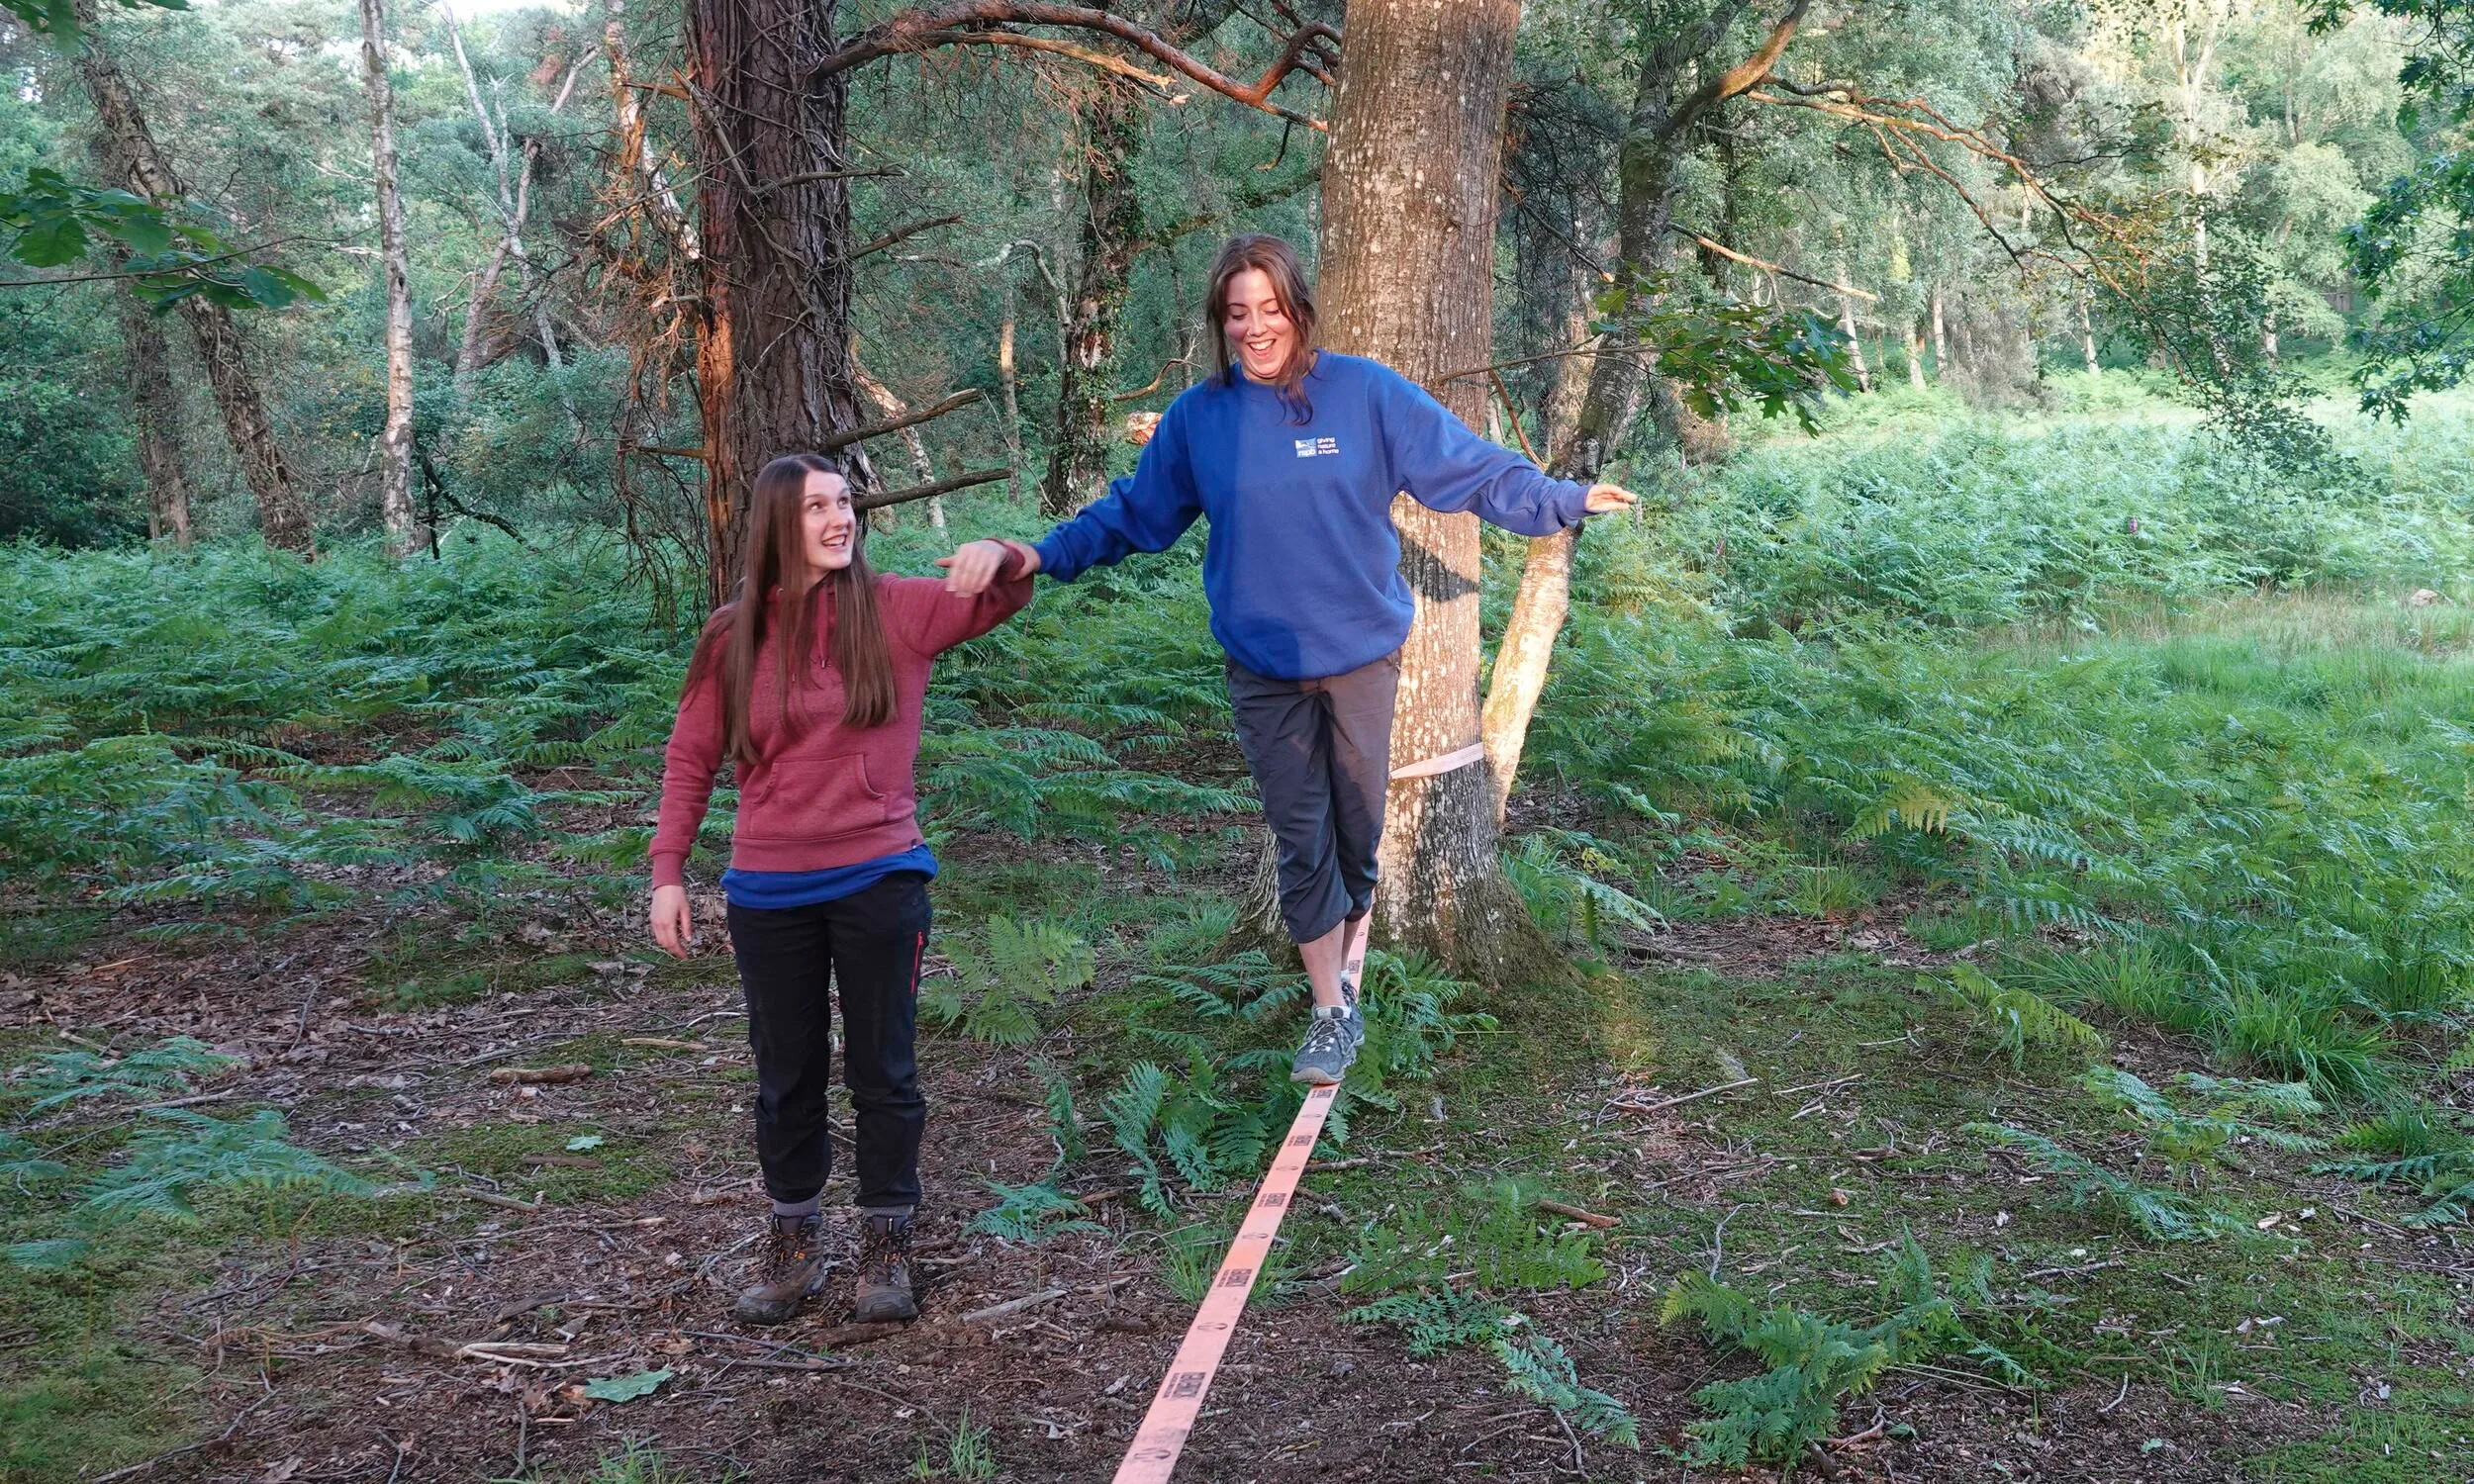 A person having a go at slack lining, in a forest setting